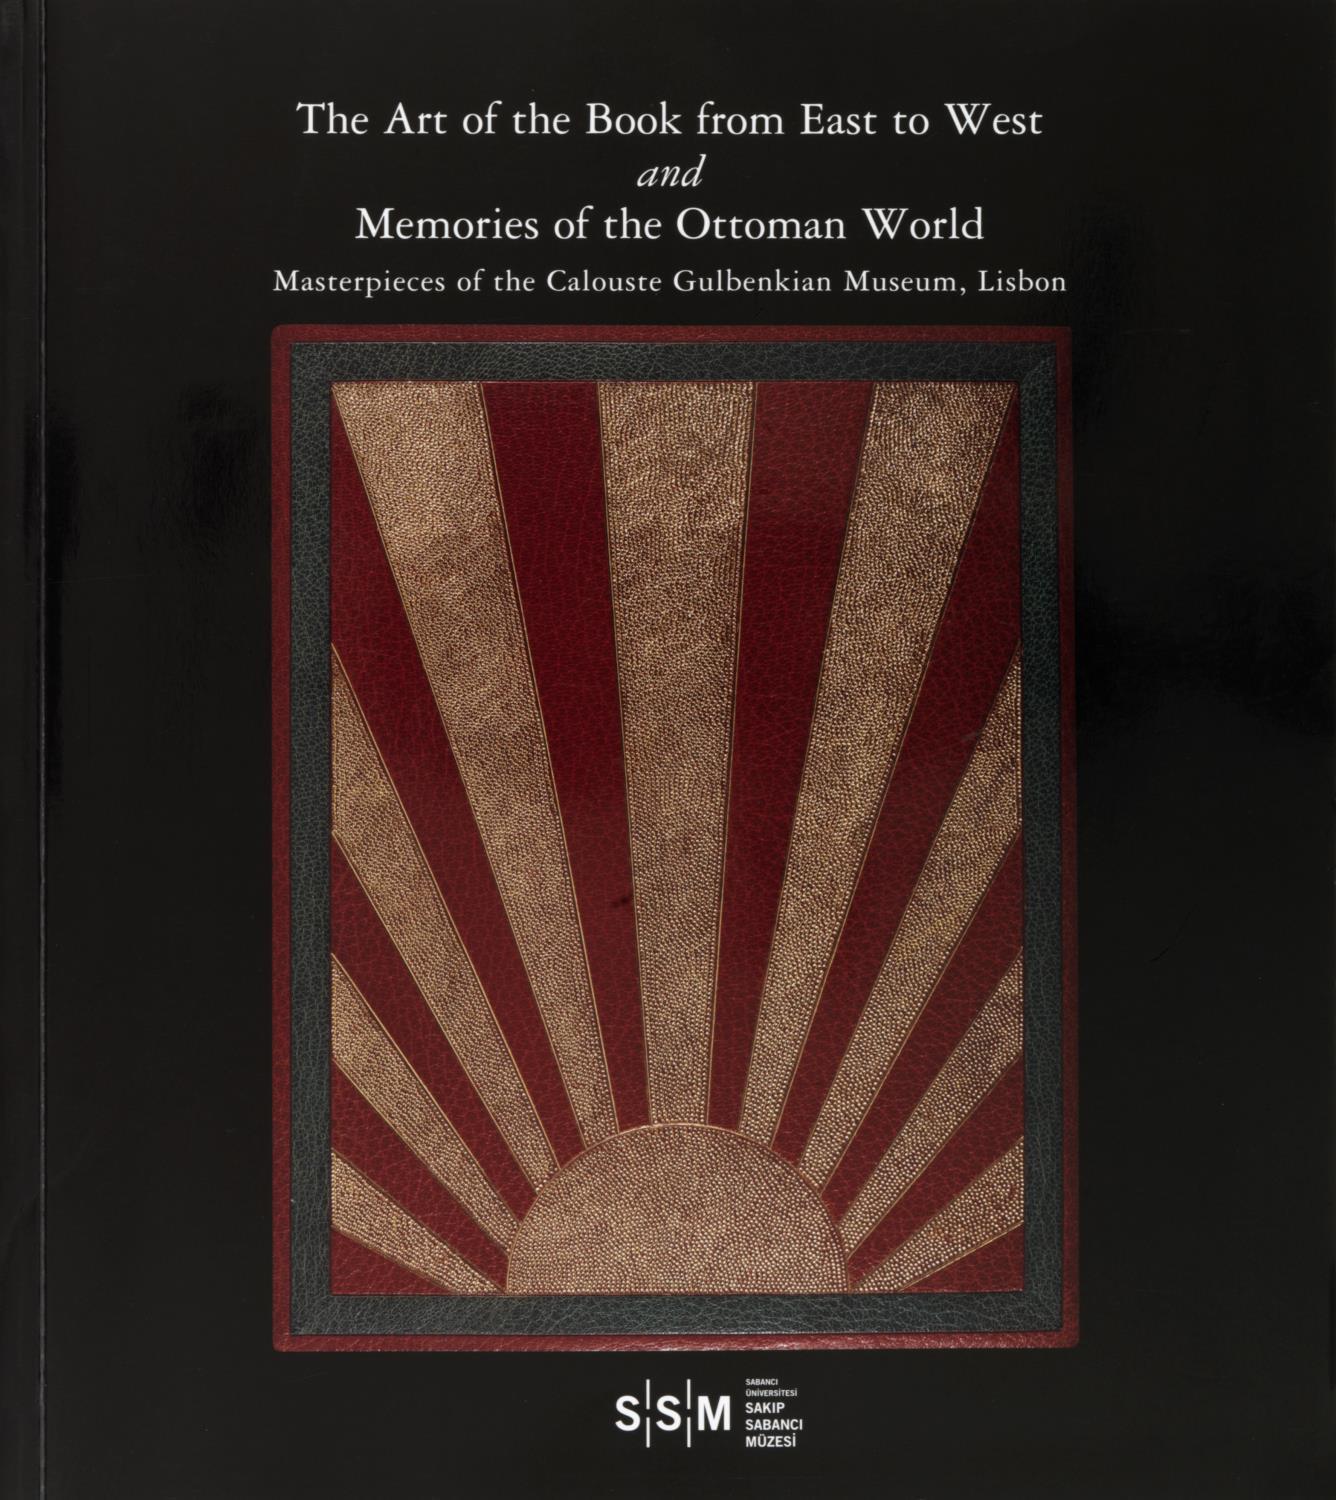 The Art of the Book from East to West and Memories of the Ottoman World. Masterpieces of the Calouste Gulbenkian Museum, Lisbon